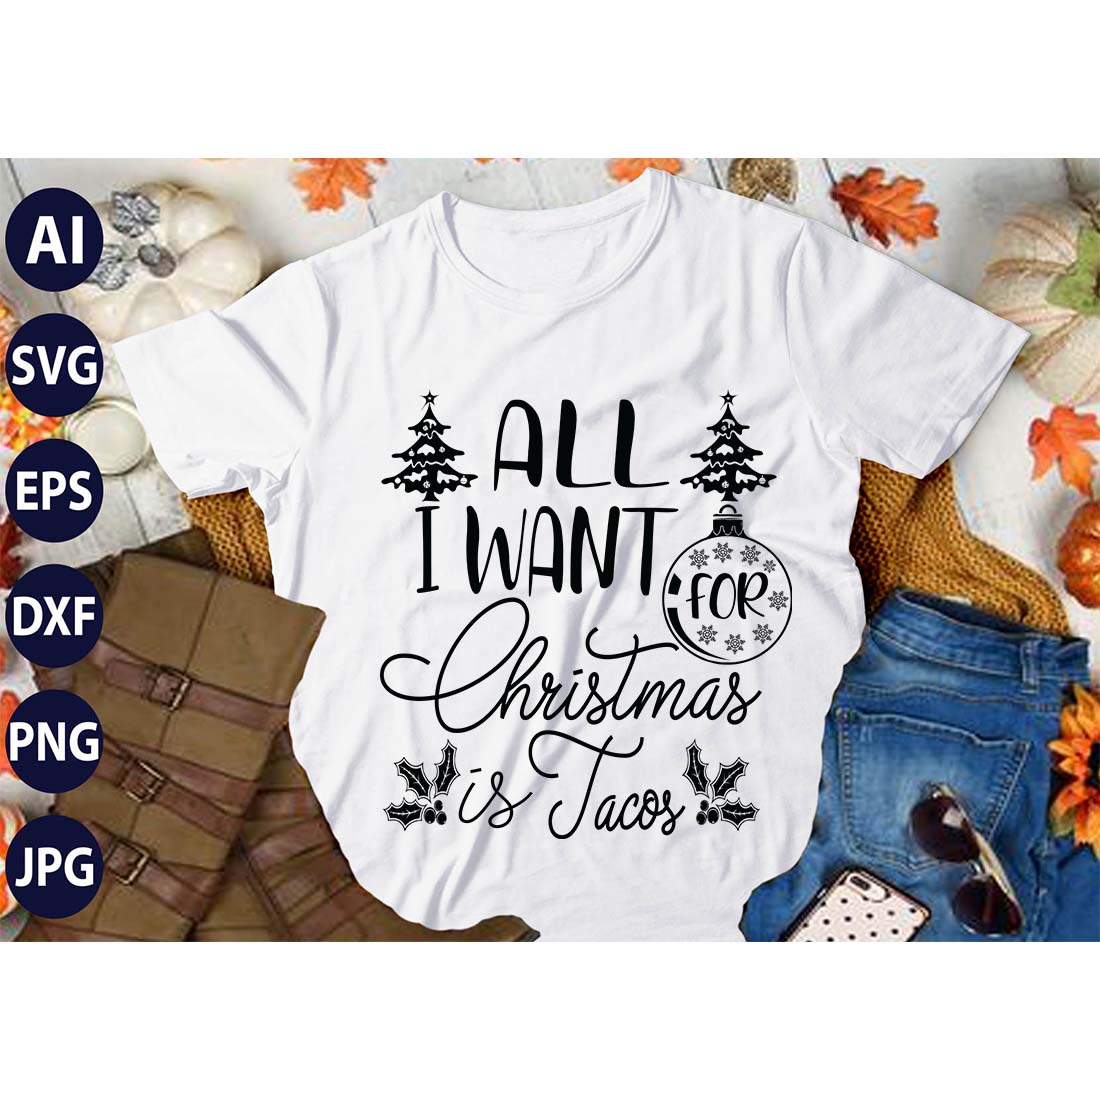 All I Want for Christmas Is Taco, SVG T-Shirt Design |Christmas Retro It's All About Jesus Typography Tshirt Design | Ai, Svg, Eps, Dxf, Jpeg, Png, Instant download T-Shirt | 100% print-ready Digital vector file preview image.